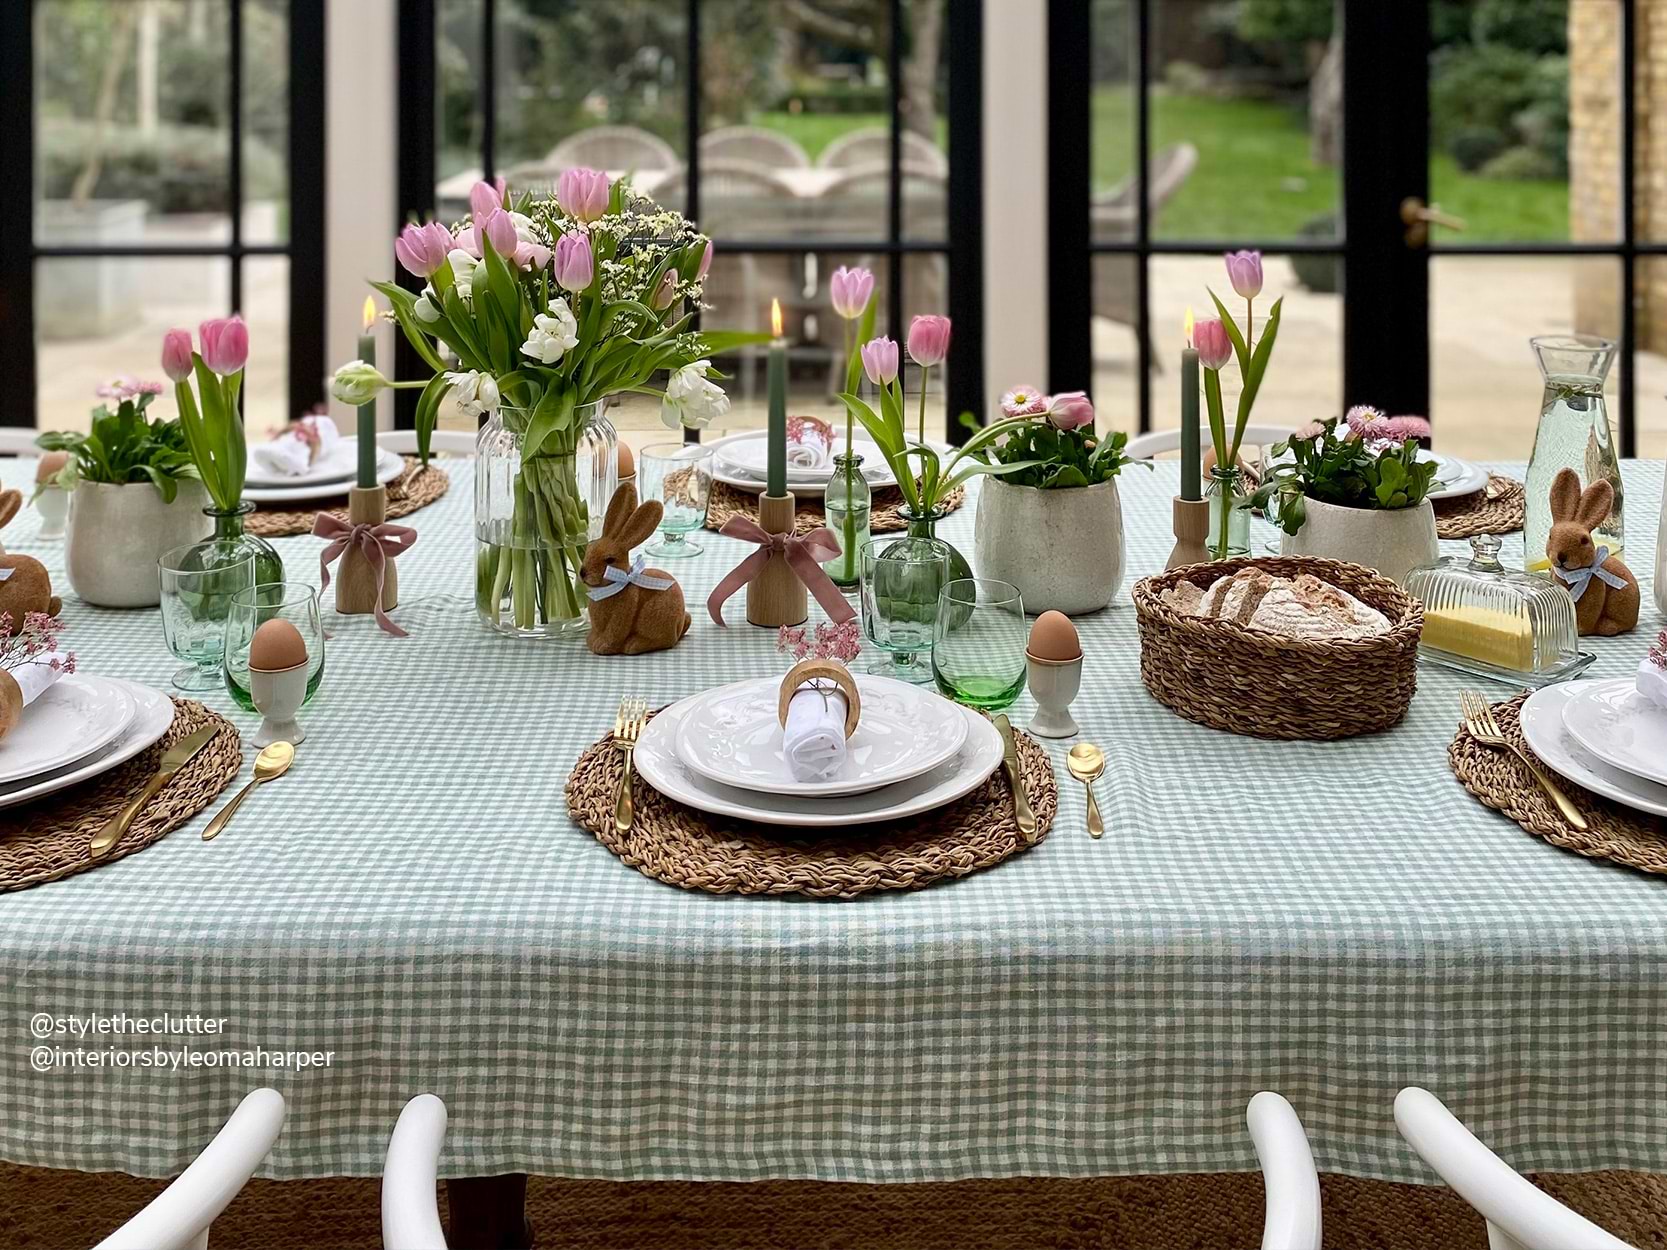 Easter themed tablescape by @Styletheclutter for Garden Trading